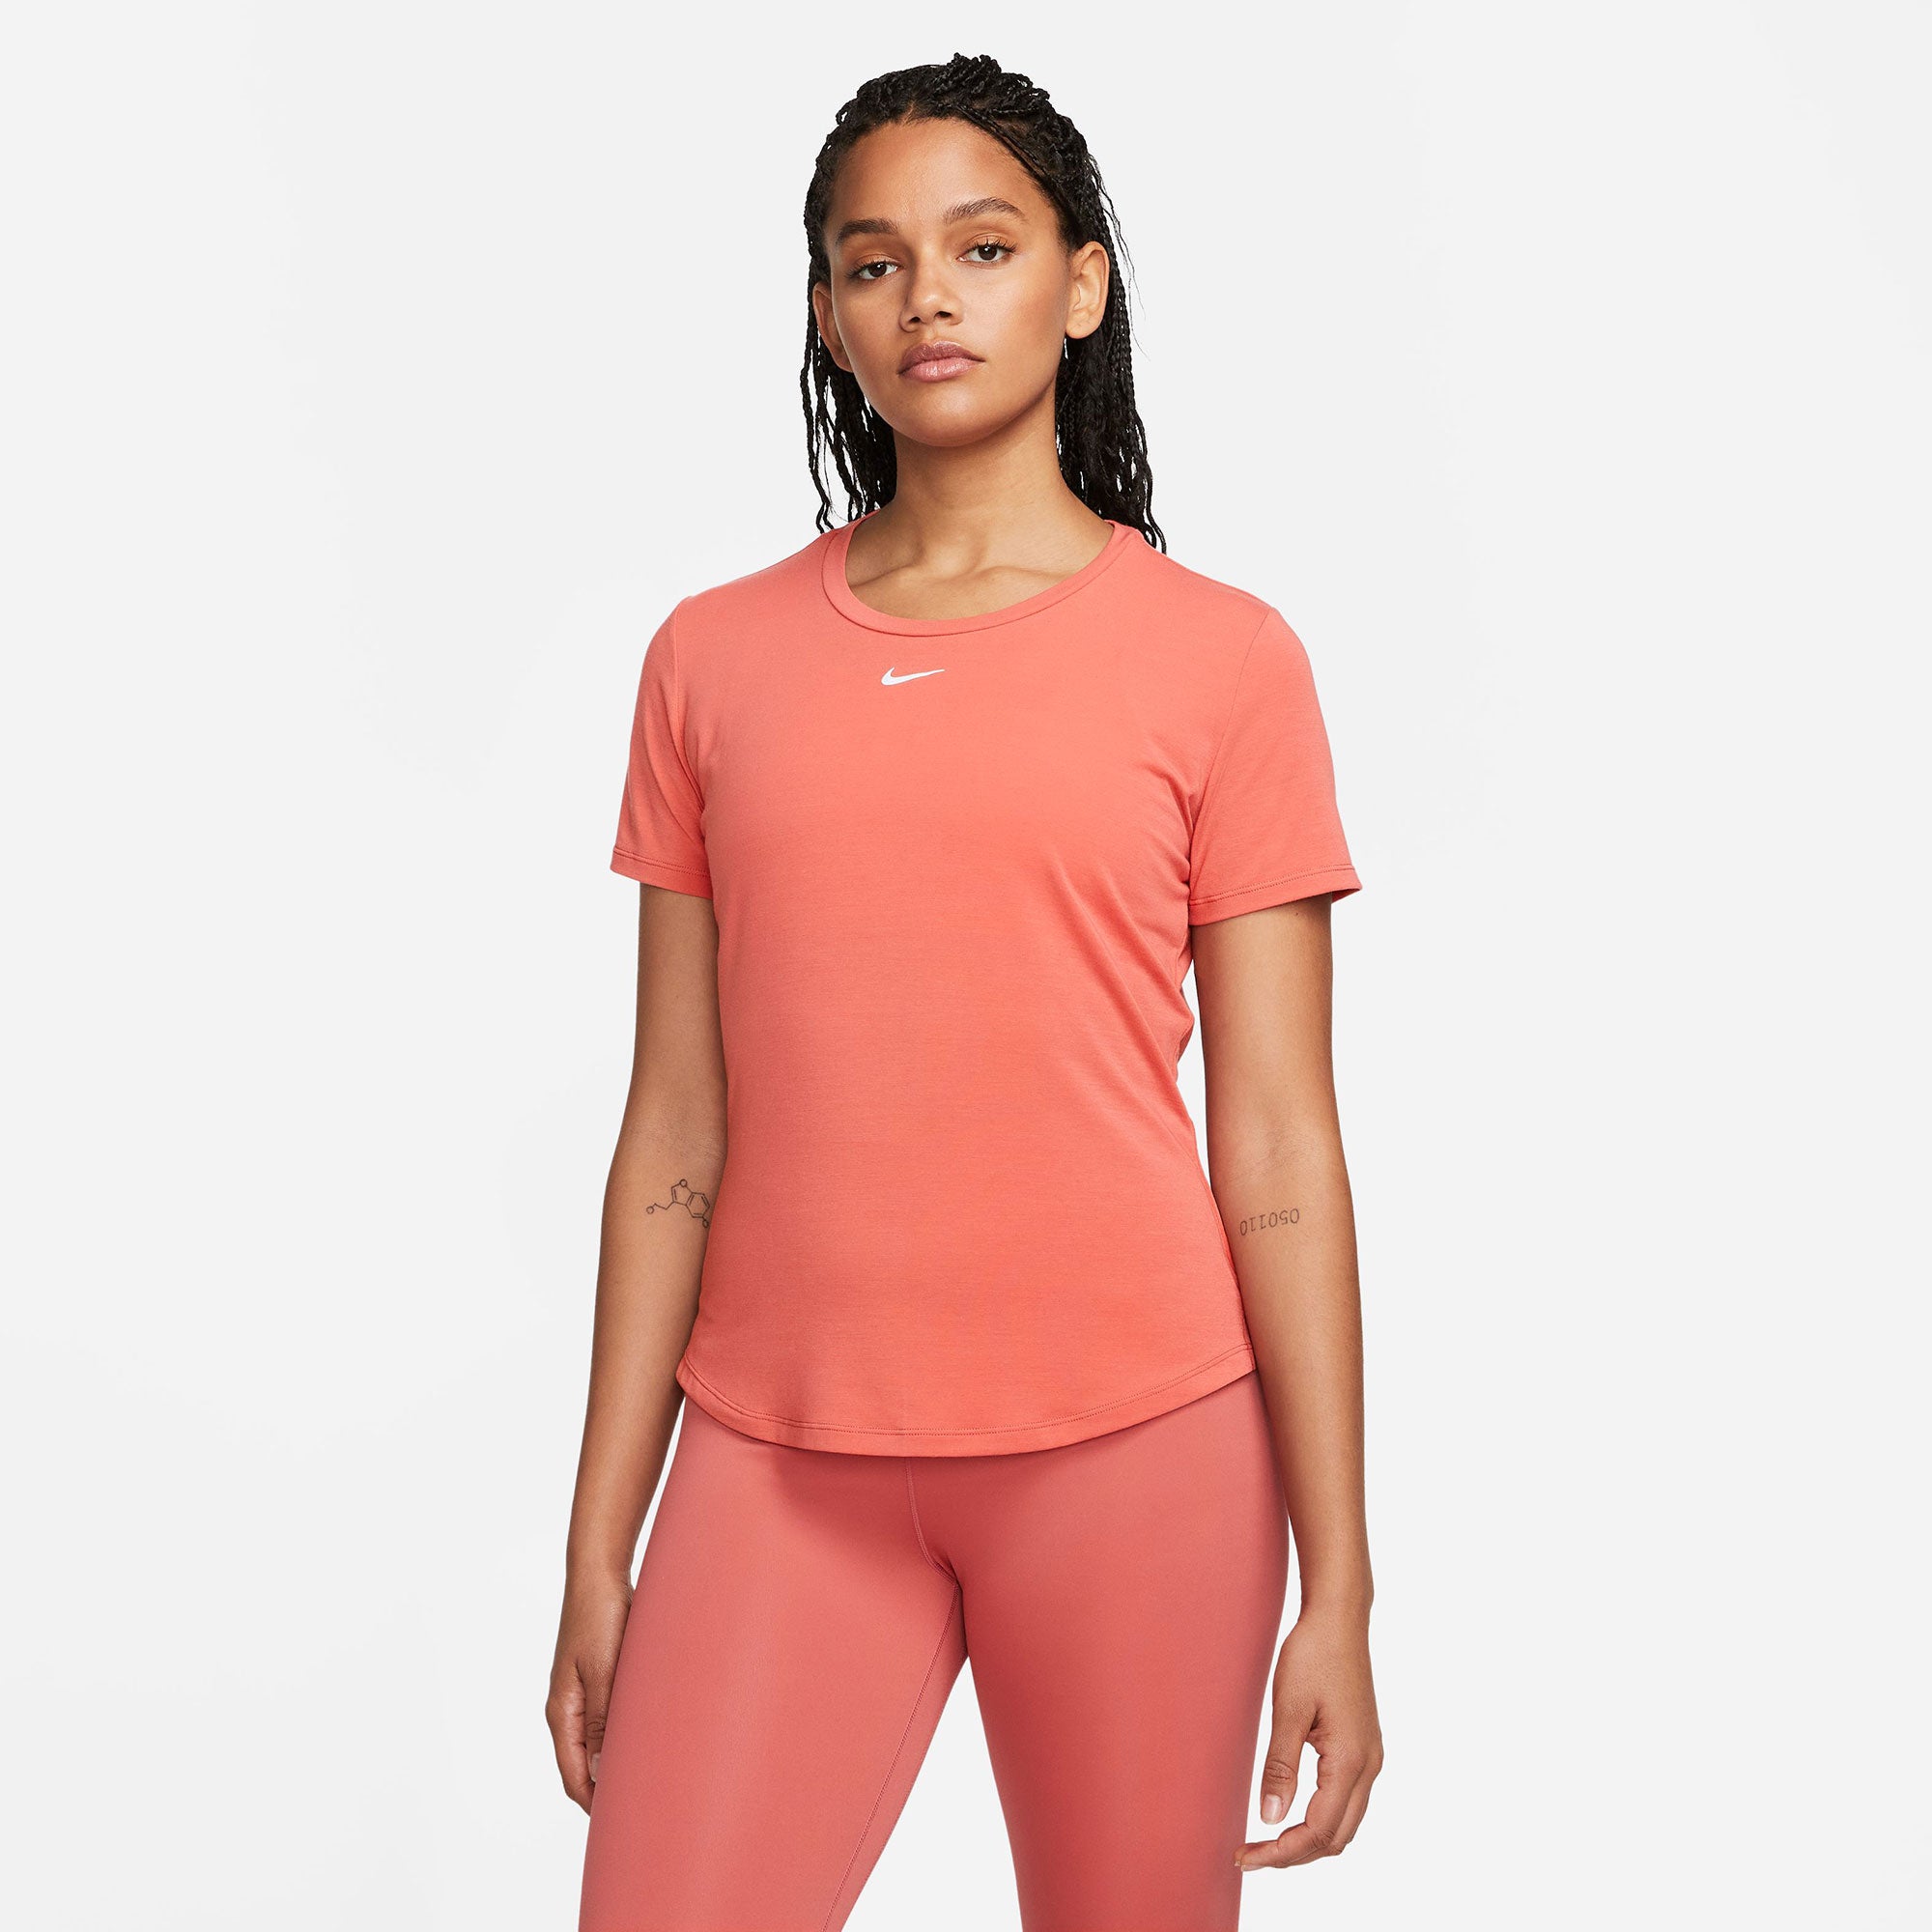 T-shirt Femme Nike One Luxe Standard Fit Automne